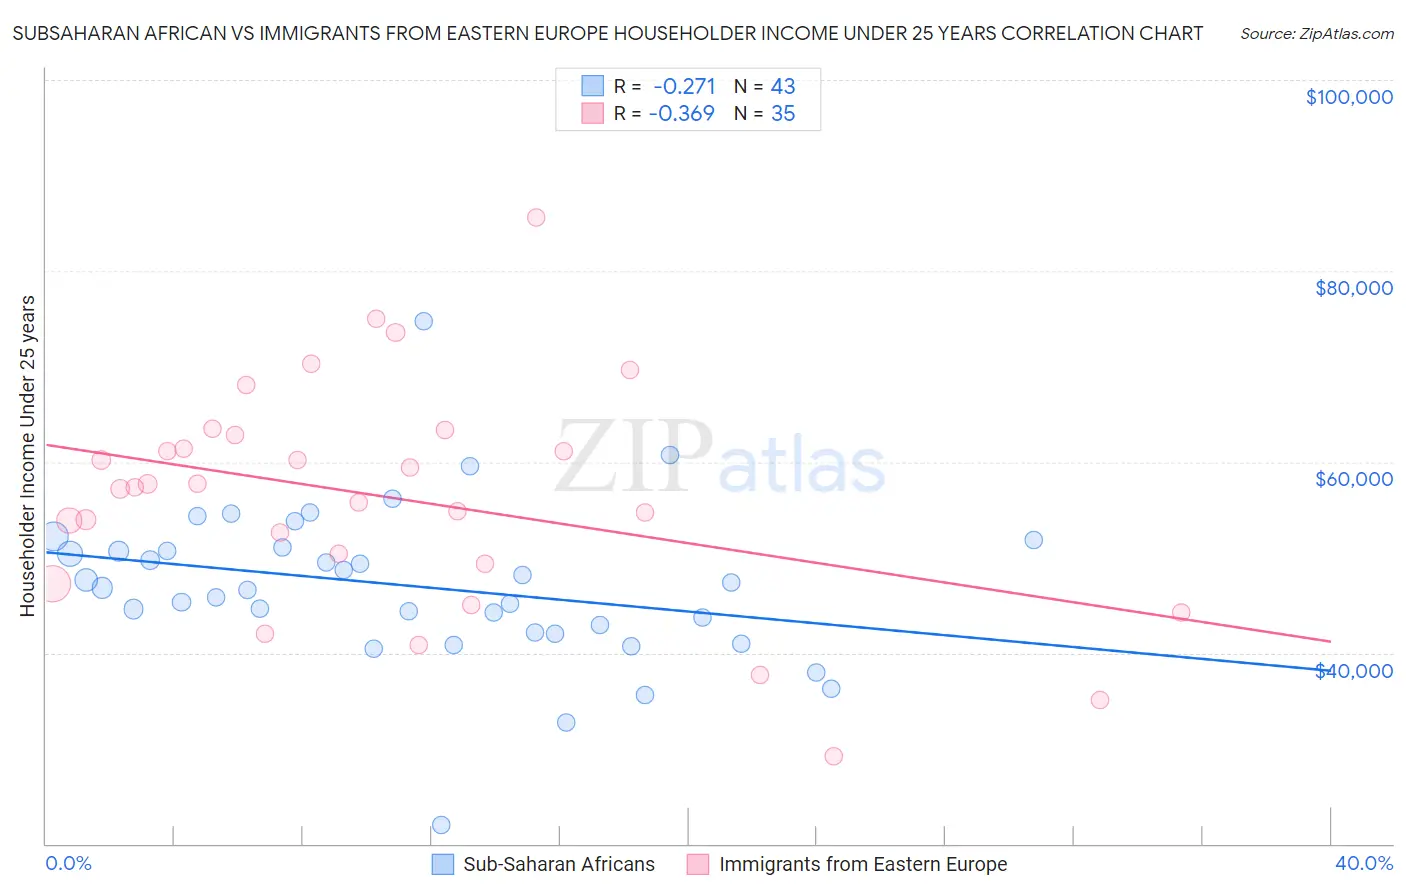 Subsaharan African vs Immigrants from Eastern Europe Householder Income Under 25 years